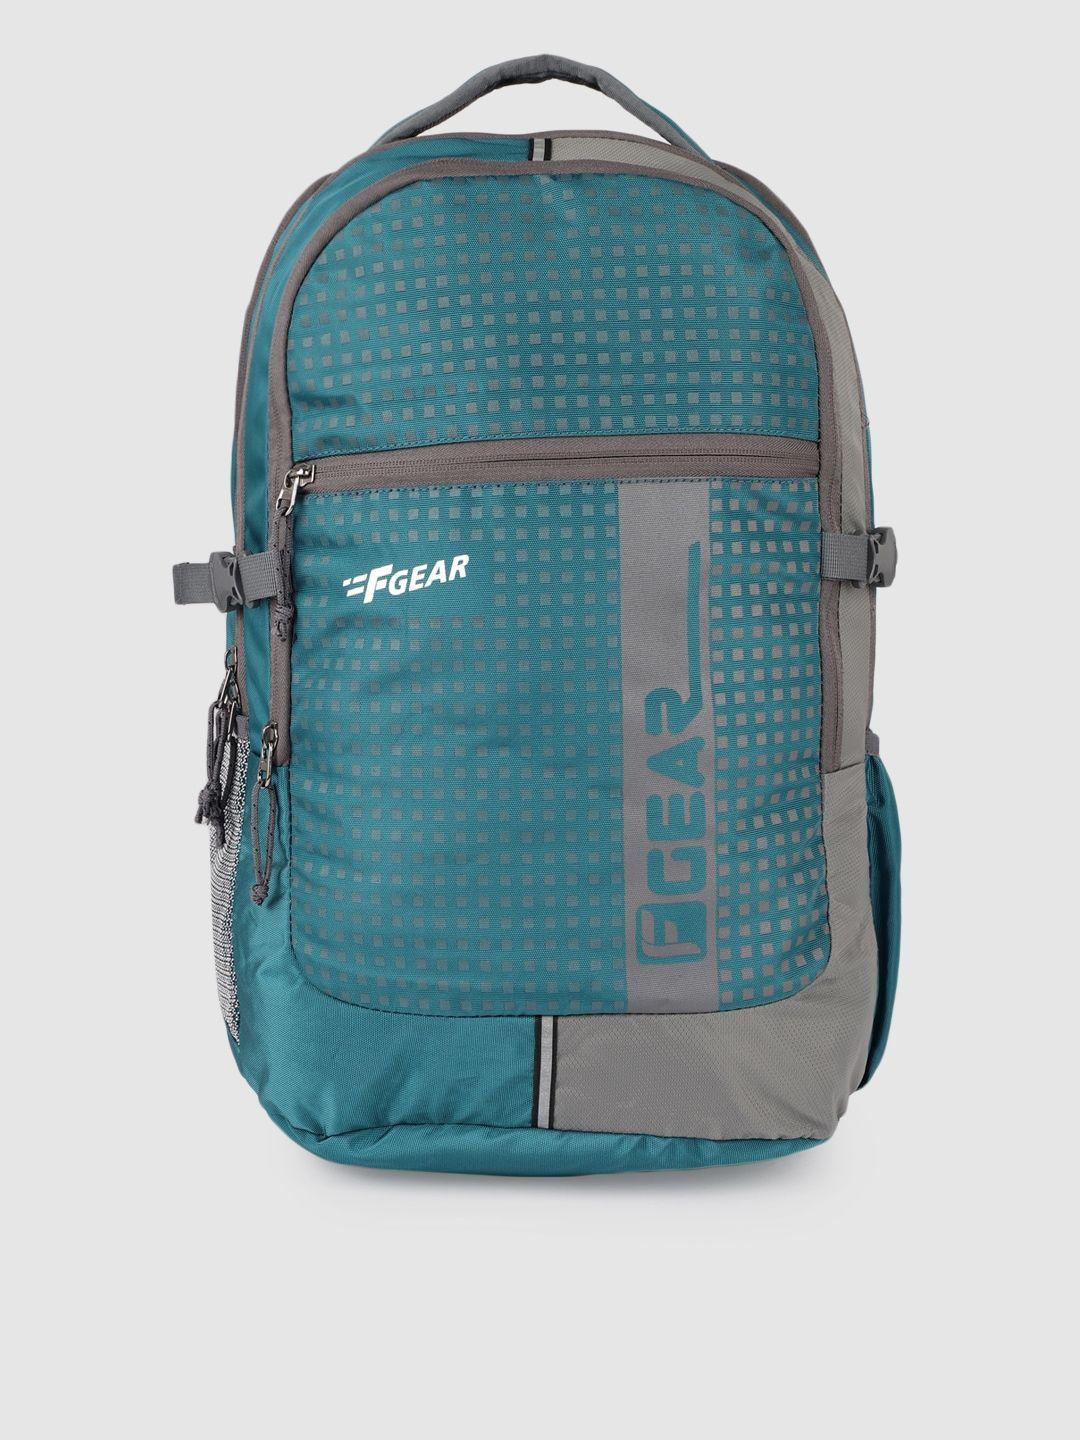 f gear unisex blue & grey graphic backpack